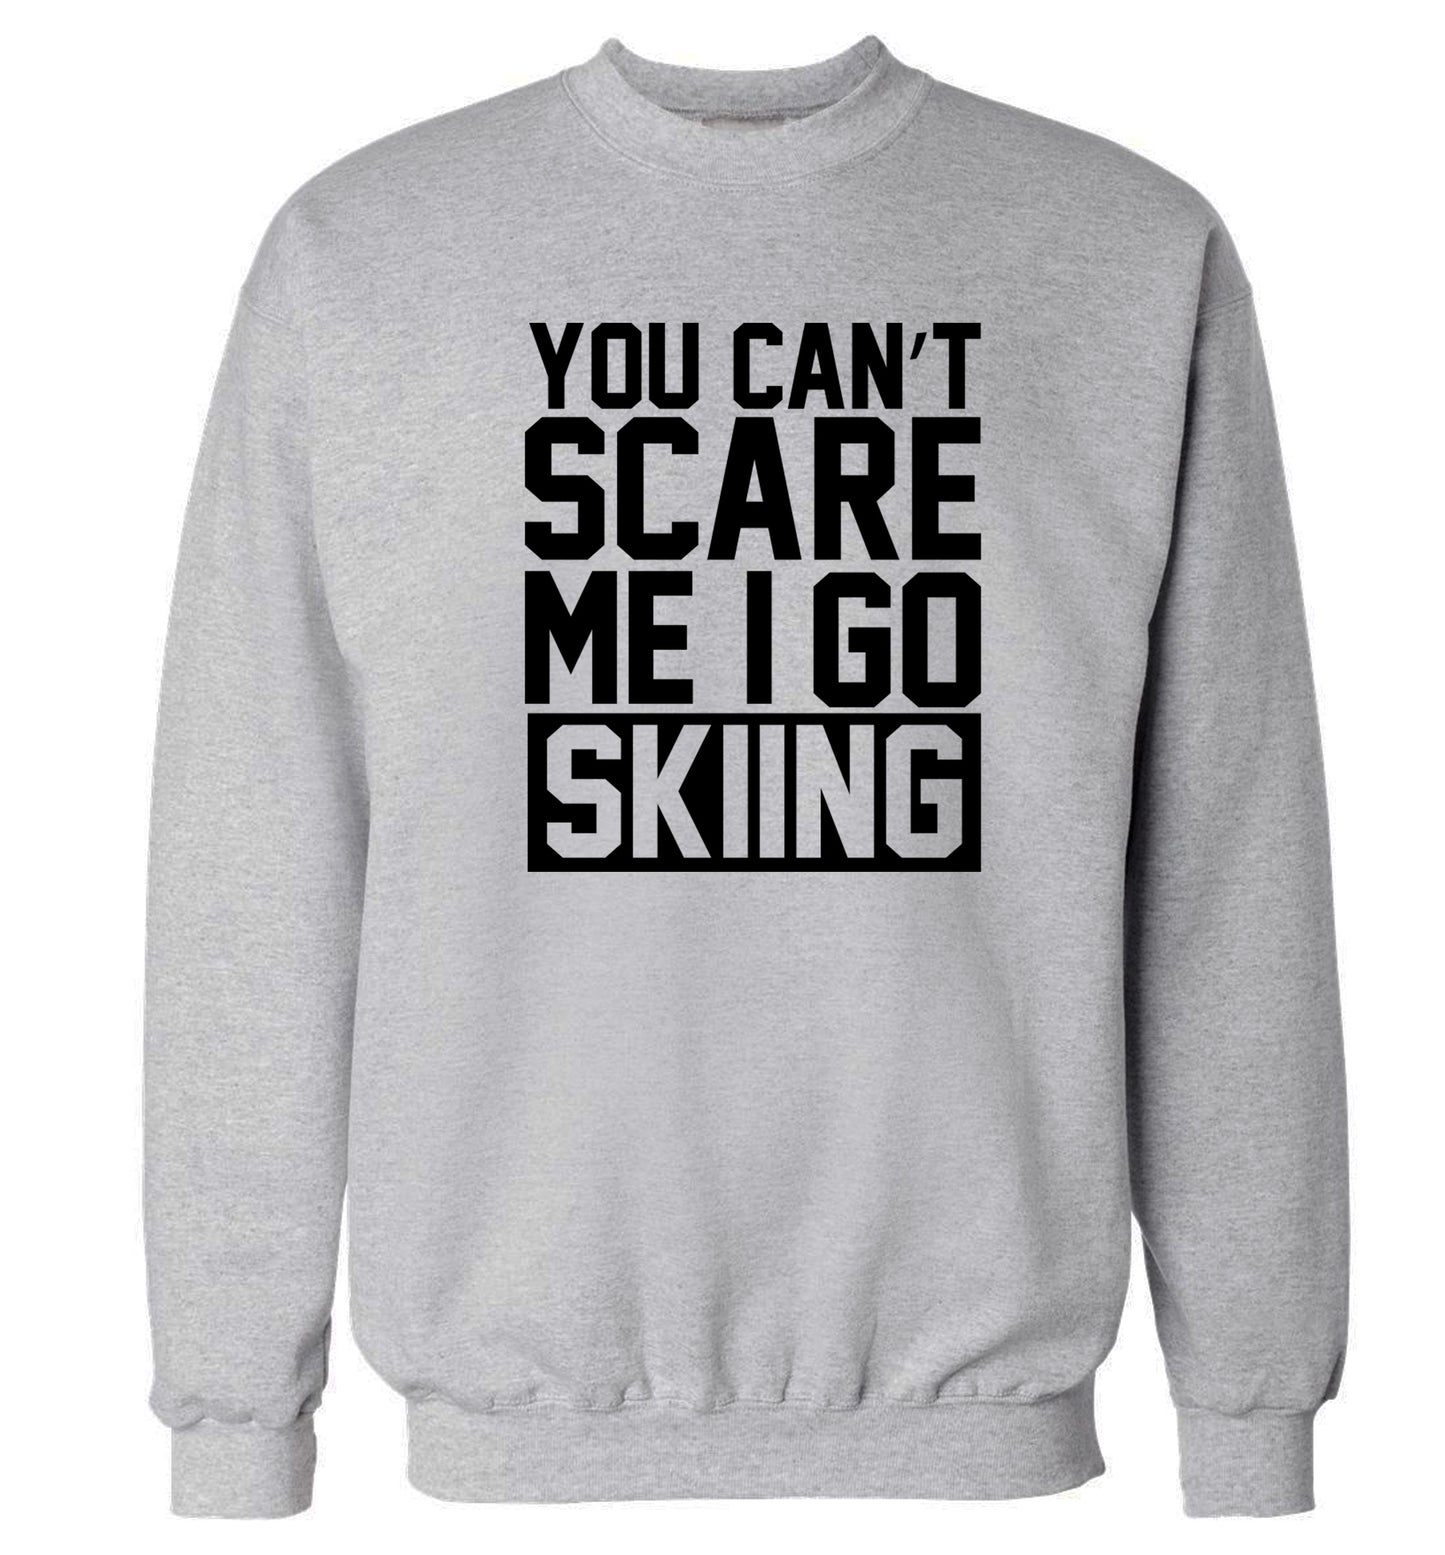 You can't scare me I go skiing Adult's unisex grey Sweater 2XL